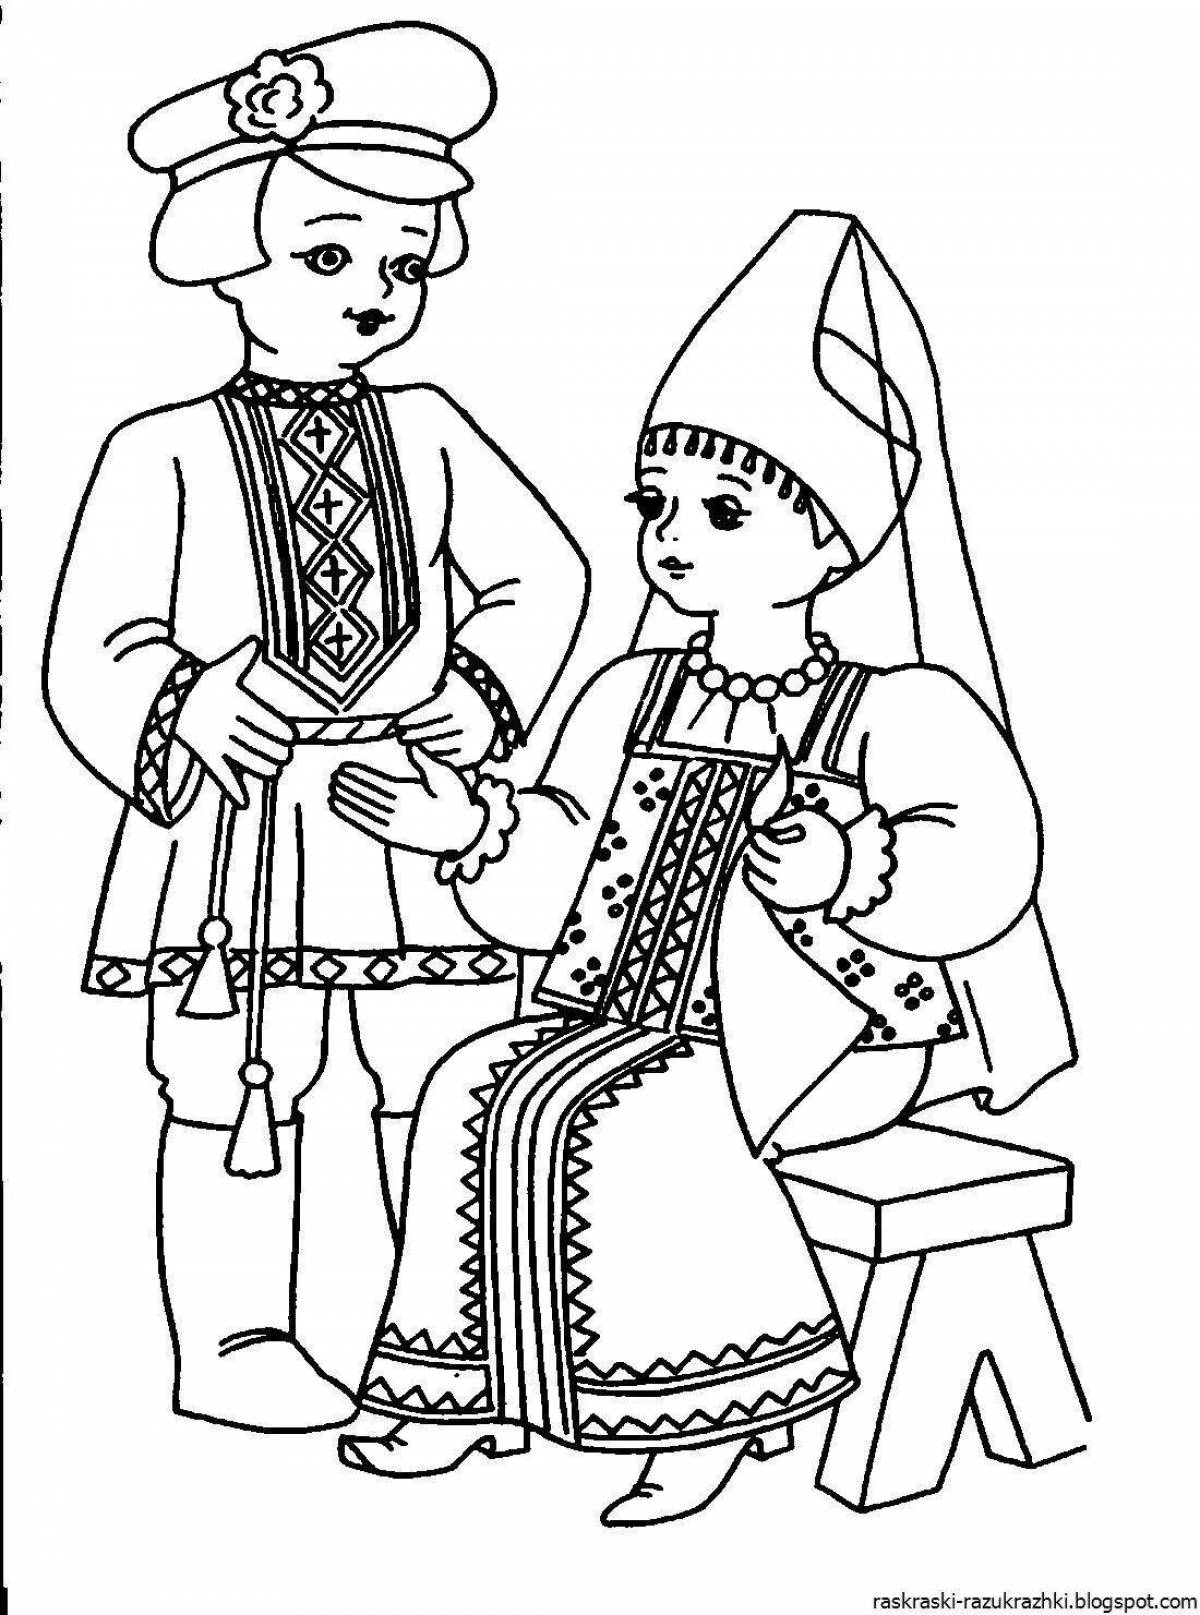 Joyful Russian folk clothes coloring pages for kids